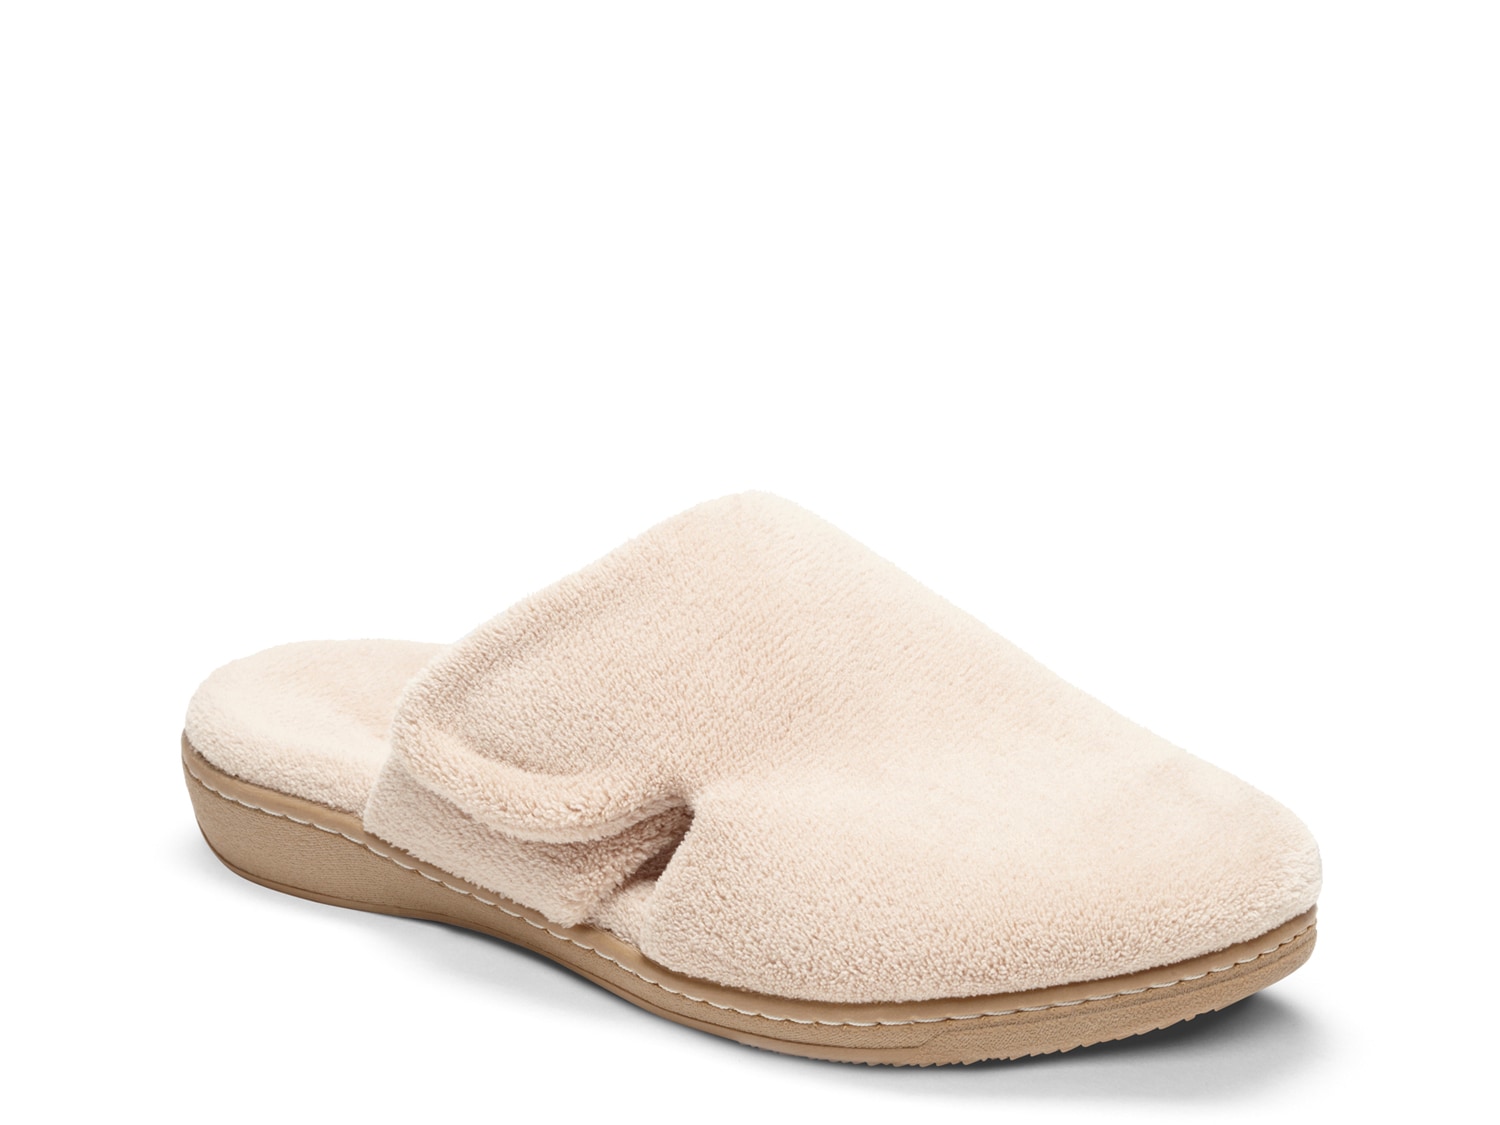 vionic slippers size 8